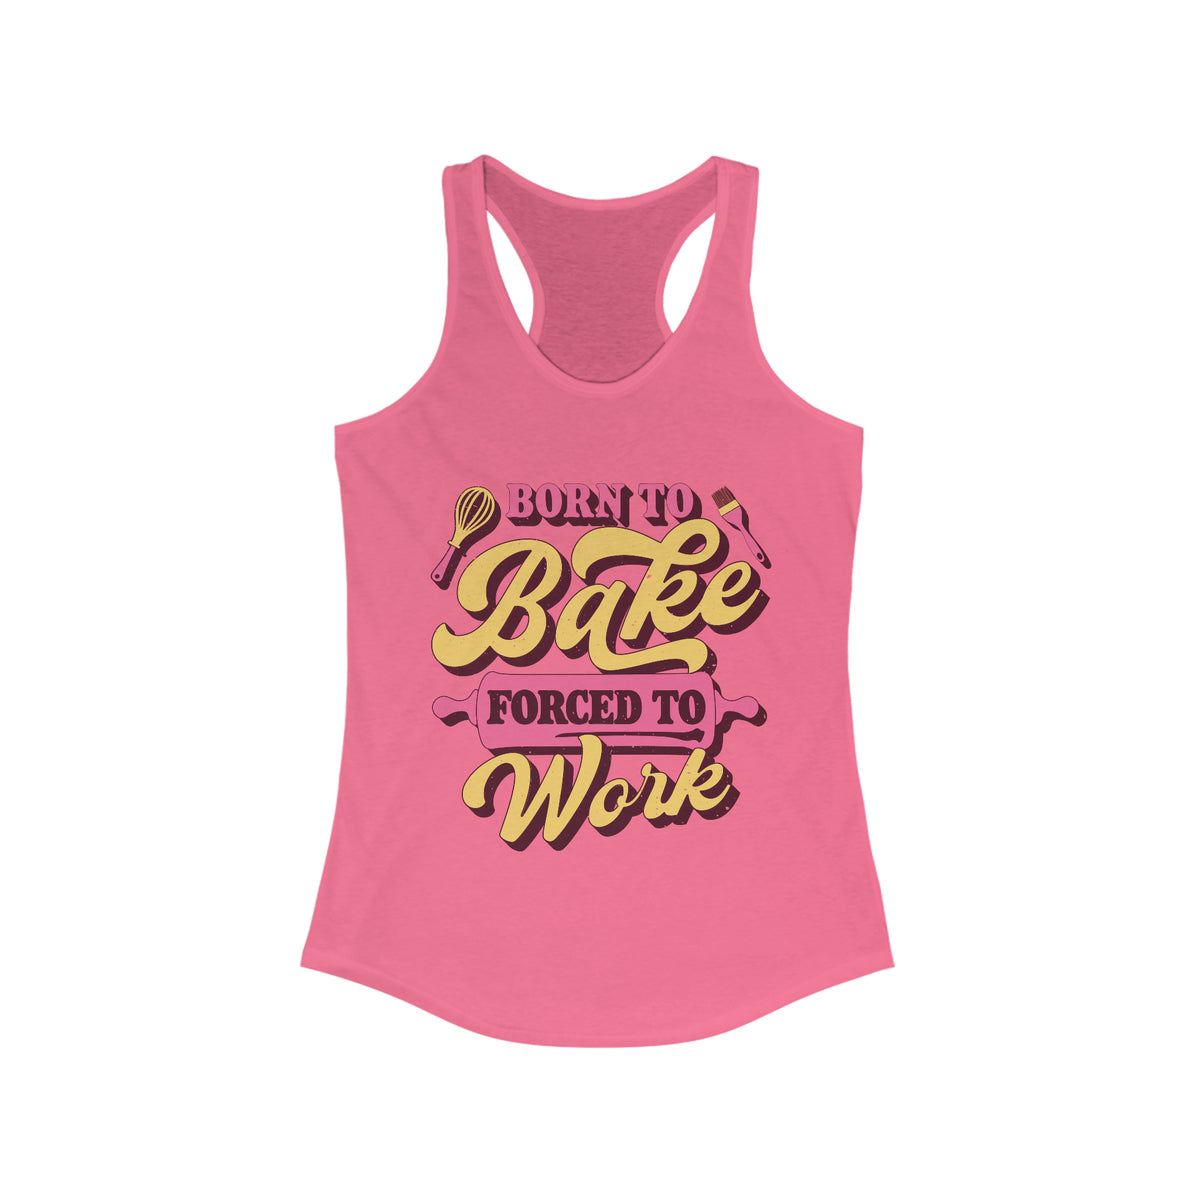 Born To Bake Funny Baking Shirt | Forced To Work Gift For Baker | Women's Slim-Fit Racerback Tank Top